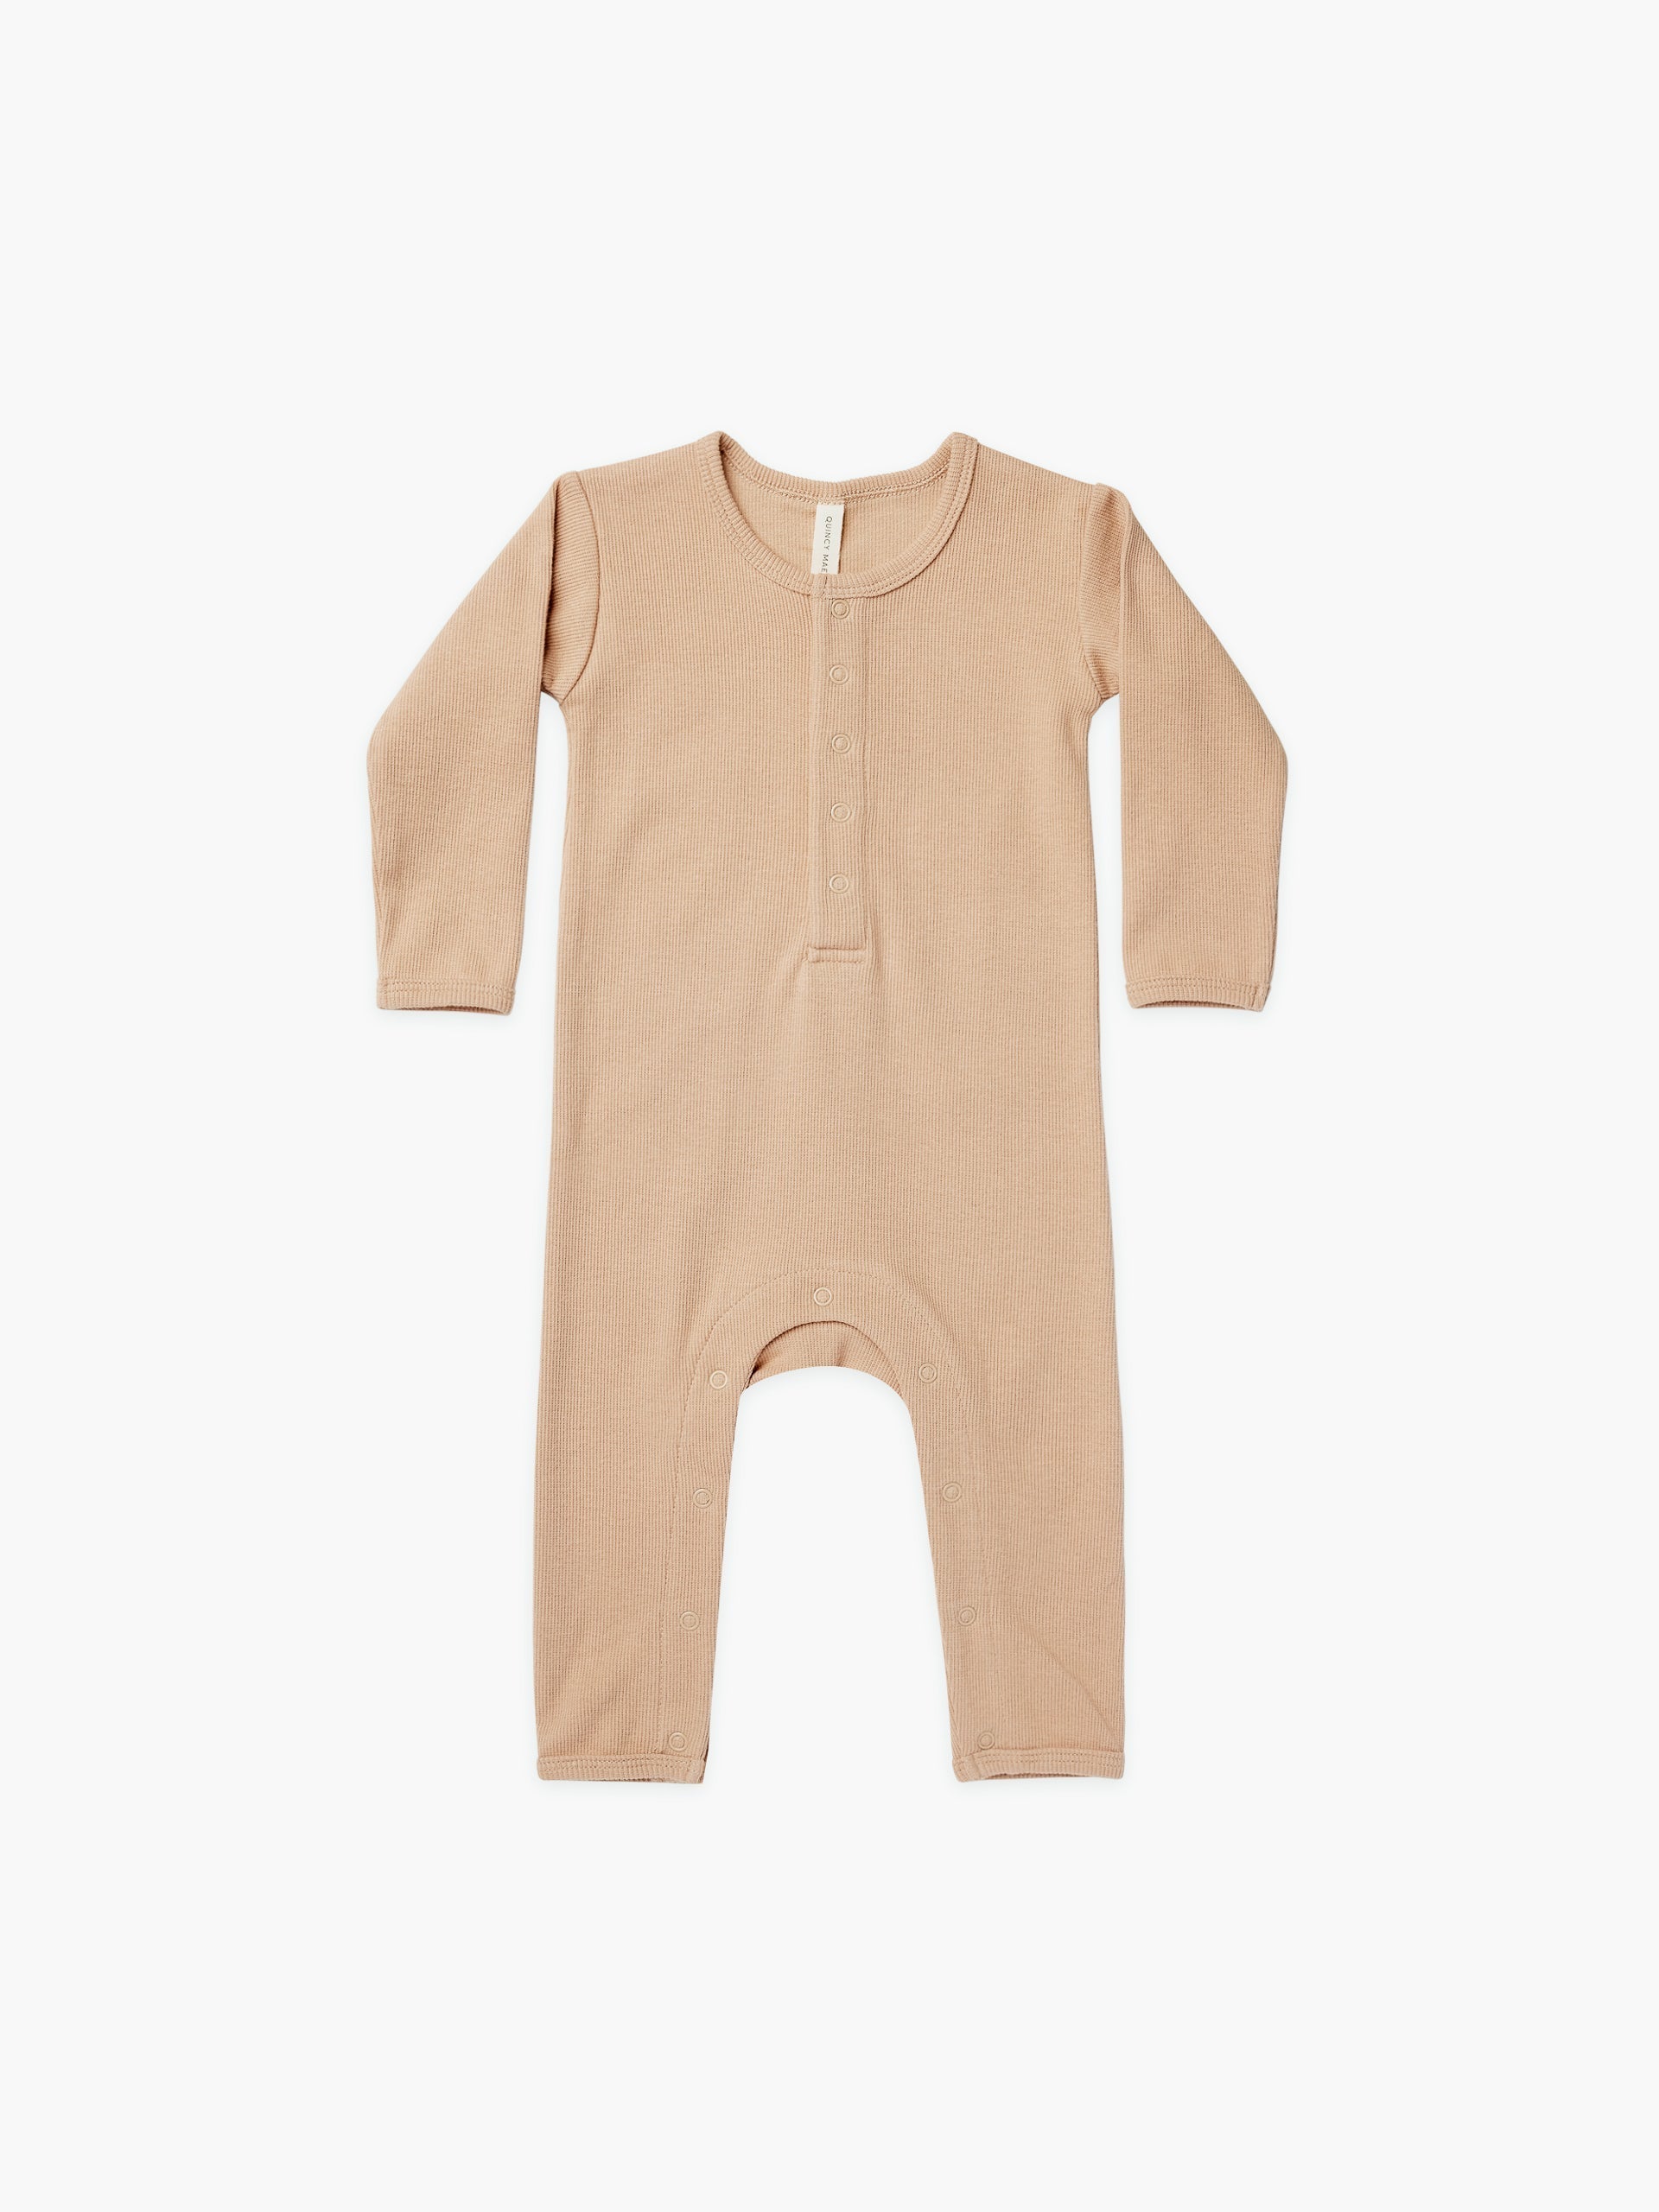 ribbed baby jumpsuit | apricot - Quincy Mae | Baby Basics | Baby Clothing | Organic Baby Clothes | Modern Baby Boy Clothes |